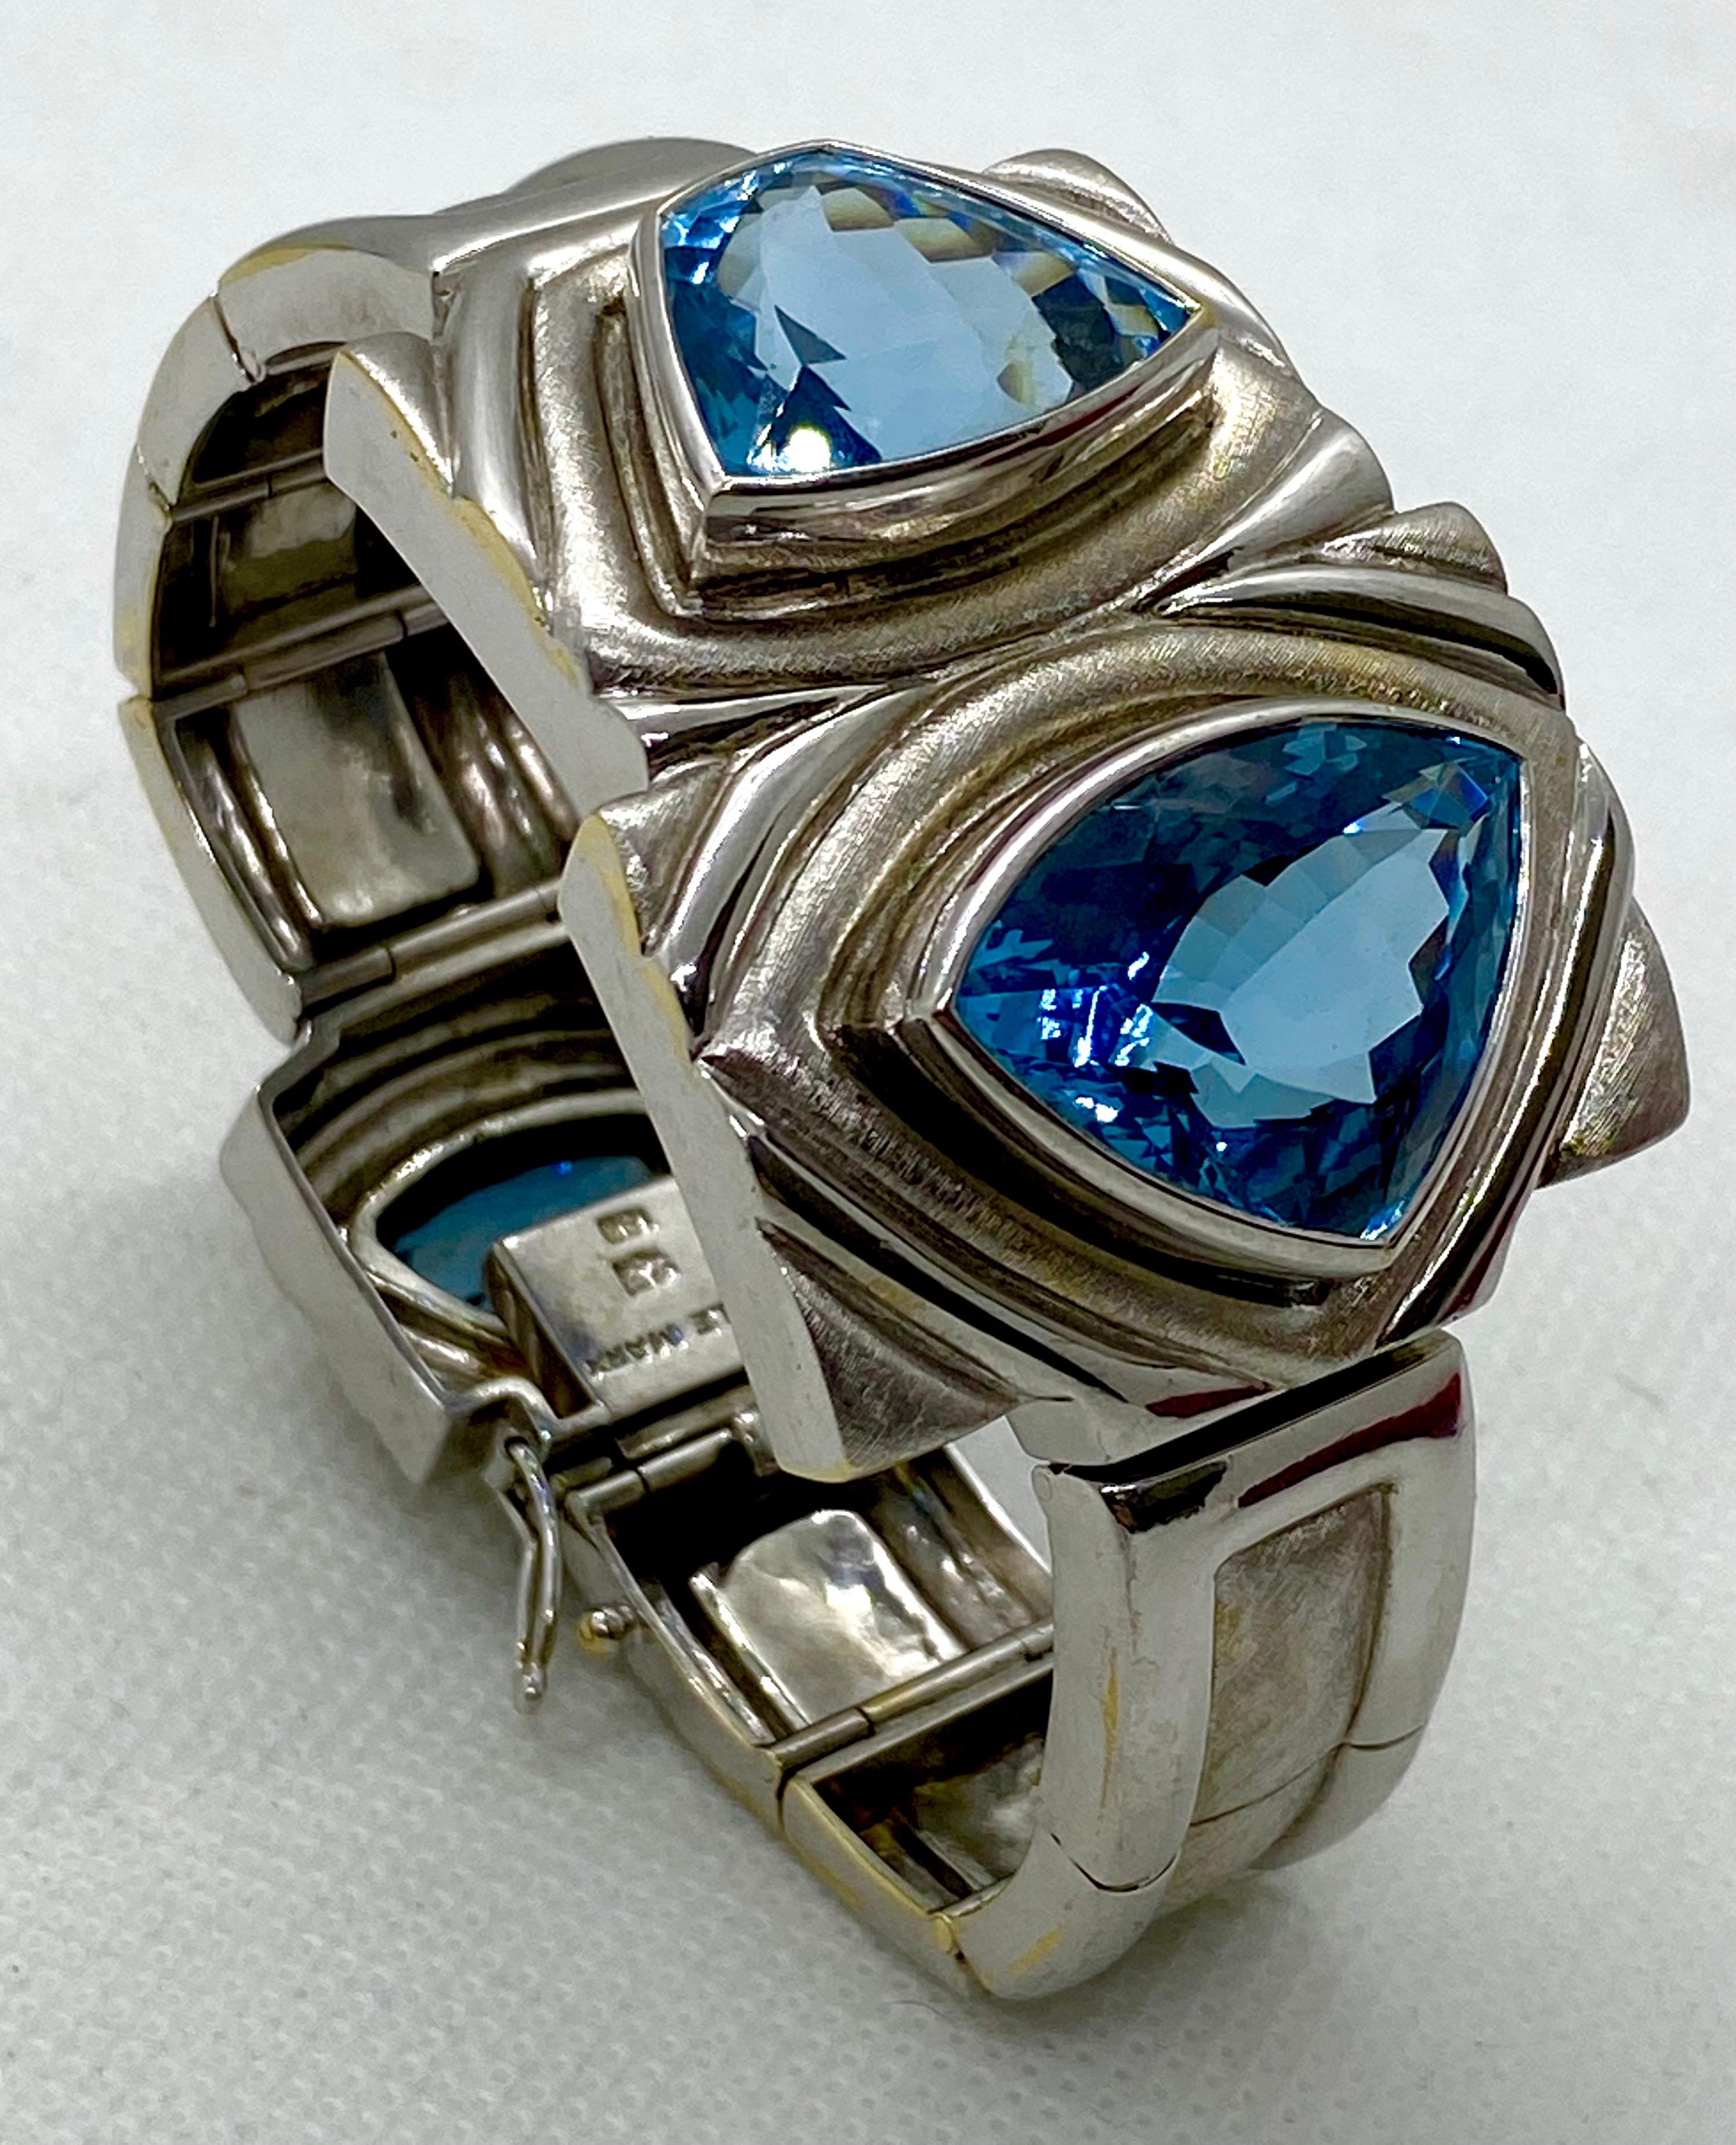 Amazing Burle Marx bracelet in 18K white gold and aquamarine form the 1980s. The jewelry by Burle Marx is entirely made by hand with no pre-casting. This stunning and one of a kind 18K white gold bracelet has three trillion cut blue topaz stones